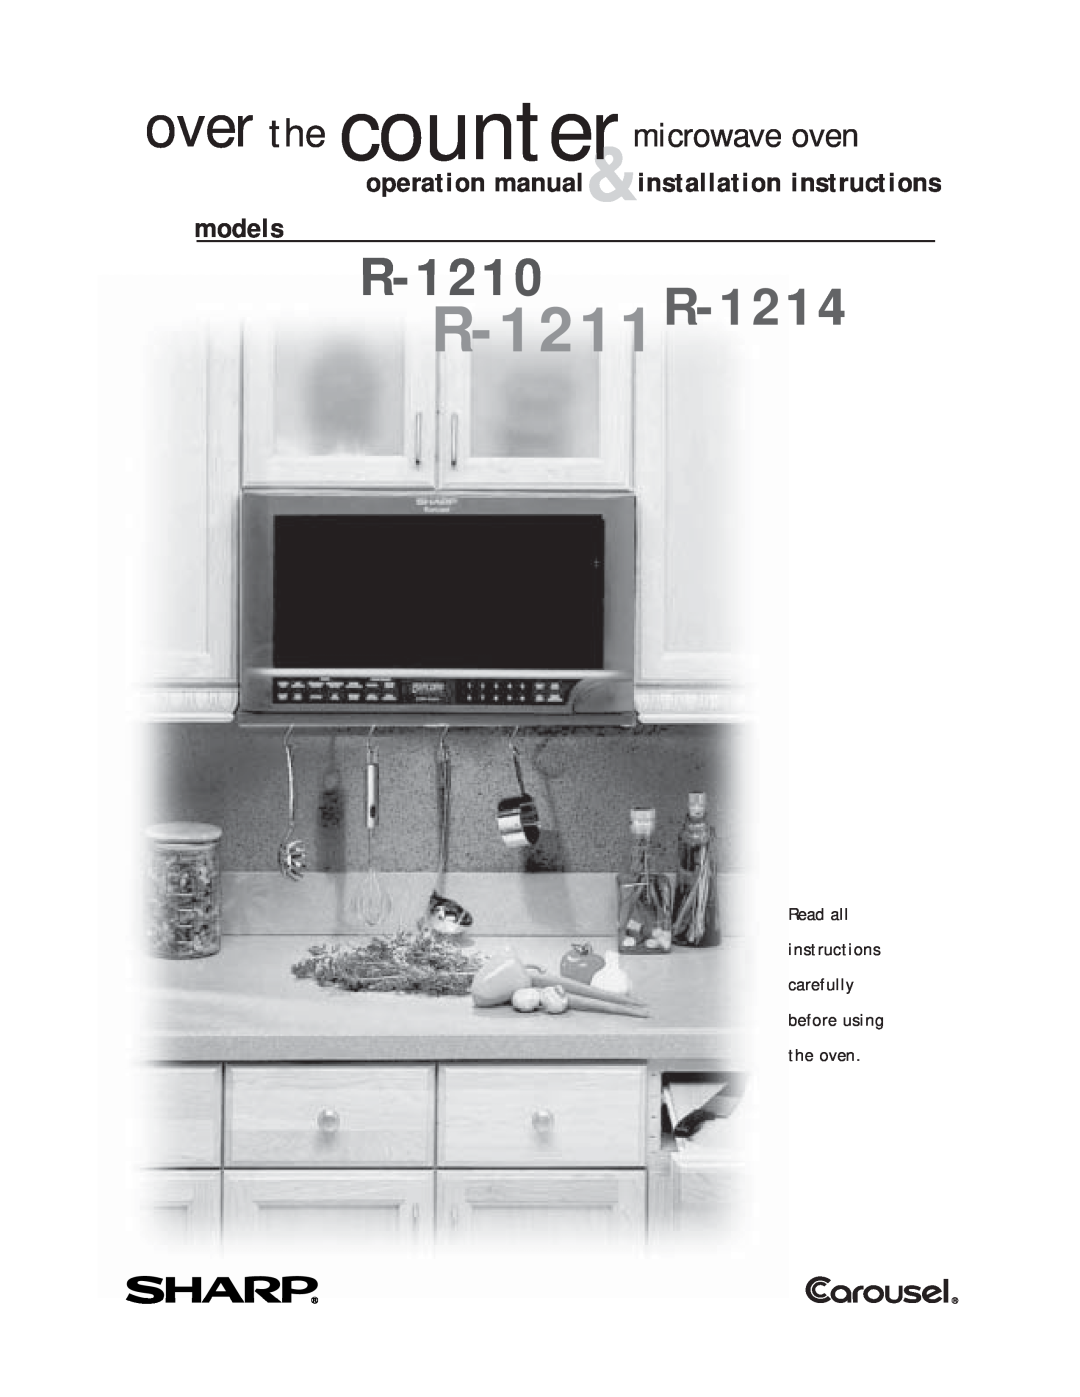 Sharp operation manual R-1211R-1214, R-1210, over the counter microwave oven 